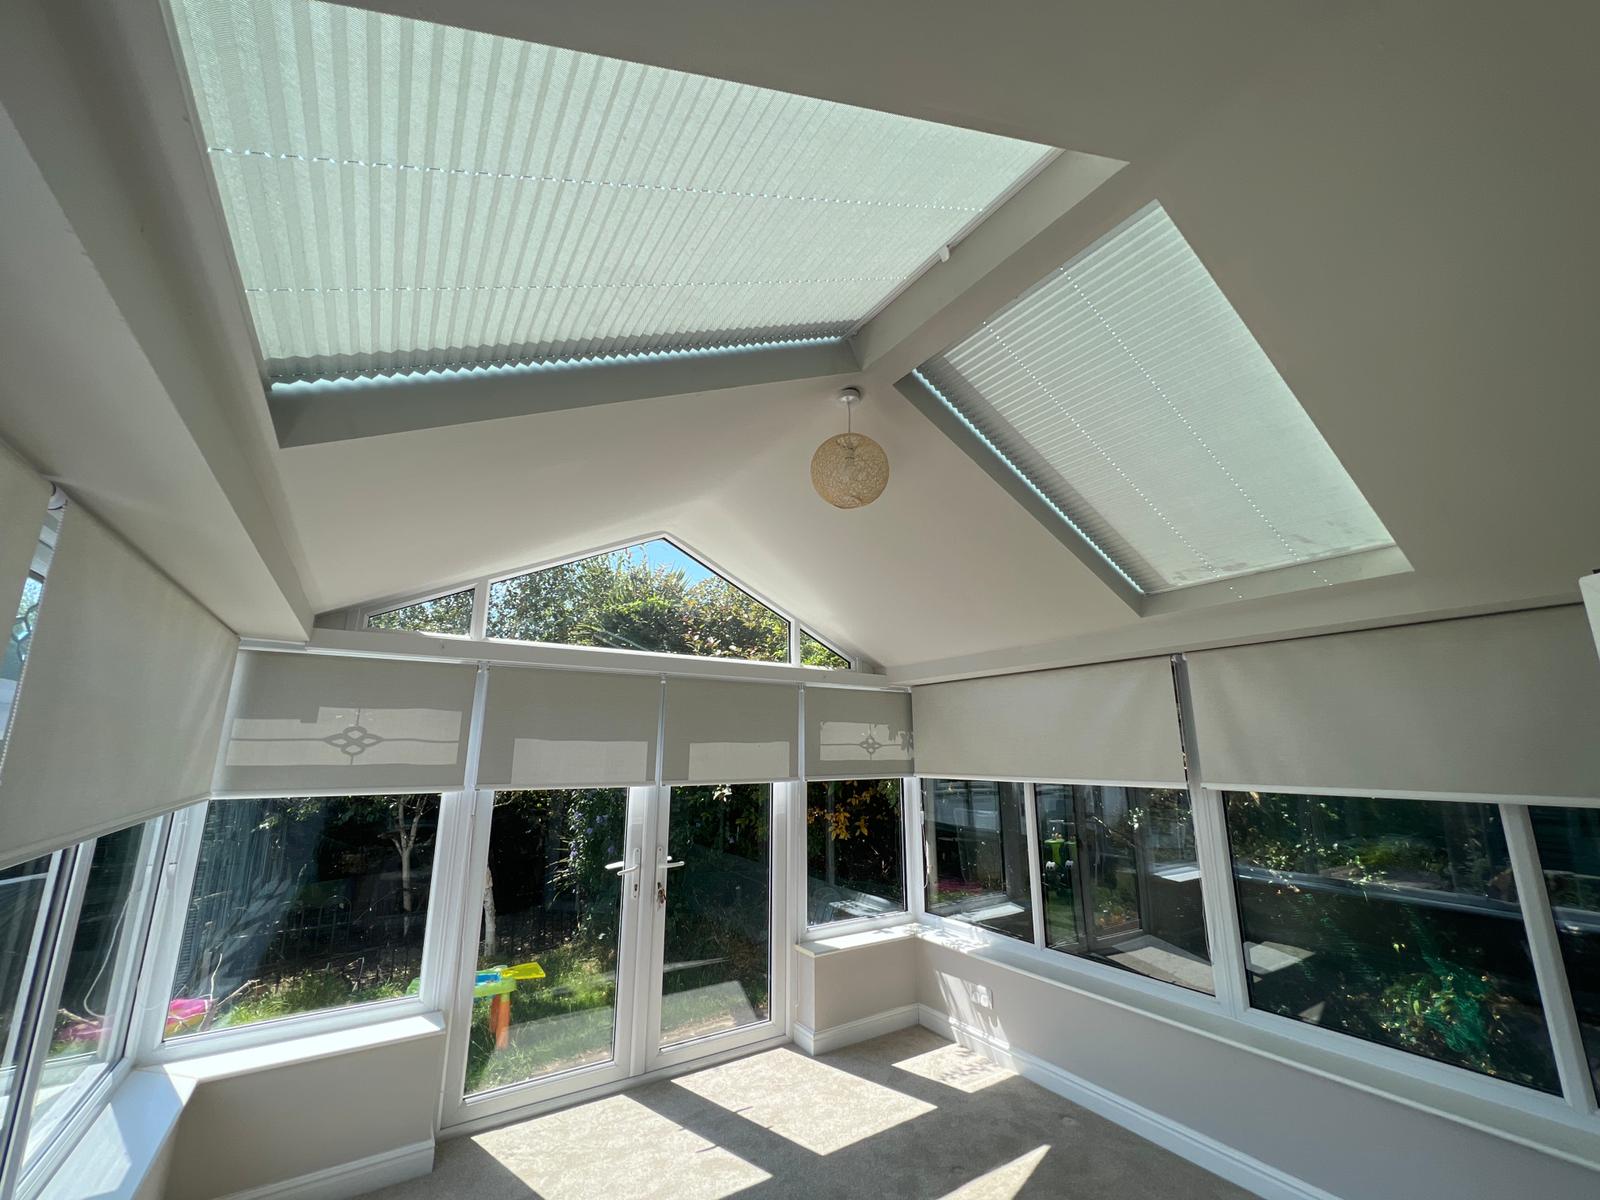 Insulating roof and side blinds